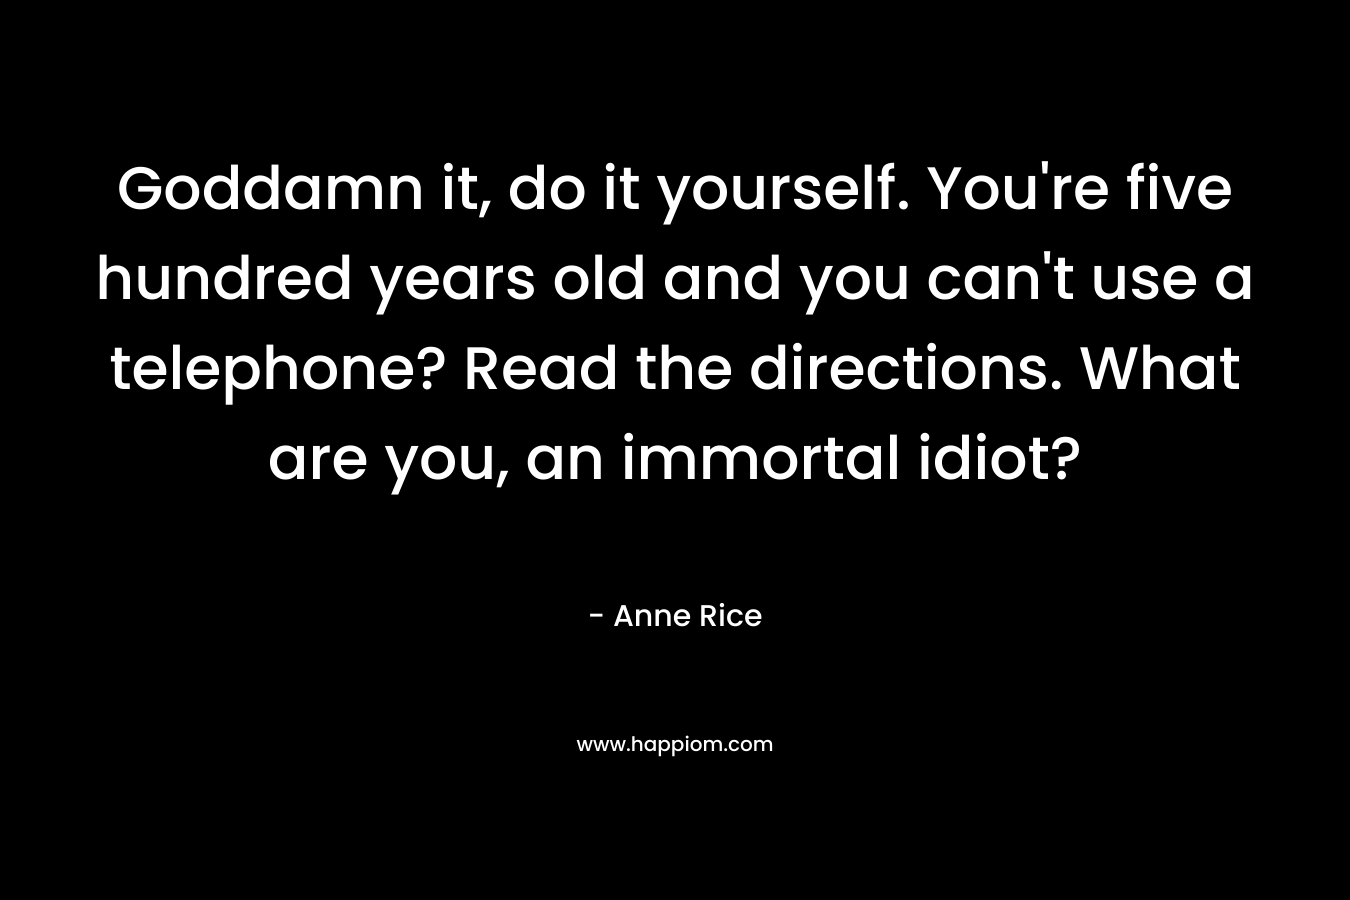 Goddamn it, do it yourself. You’re five hundred years old and you can’t use a telephone? Read the directions. What are you, an immortal idiot? – Anne Rice